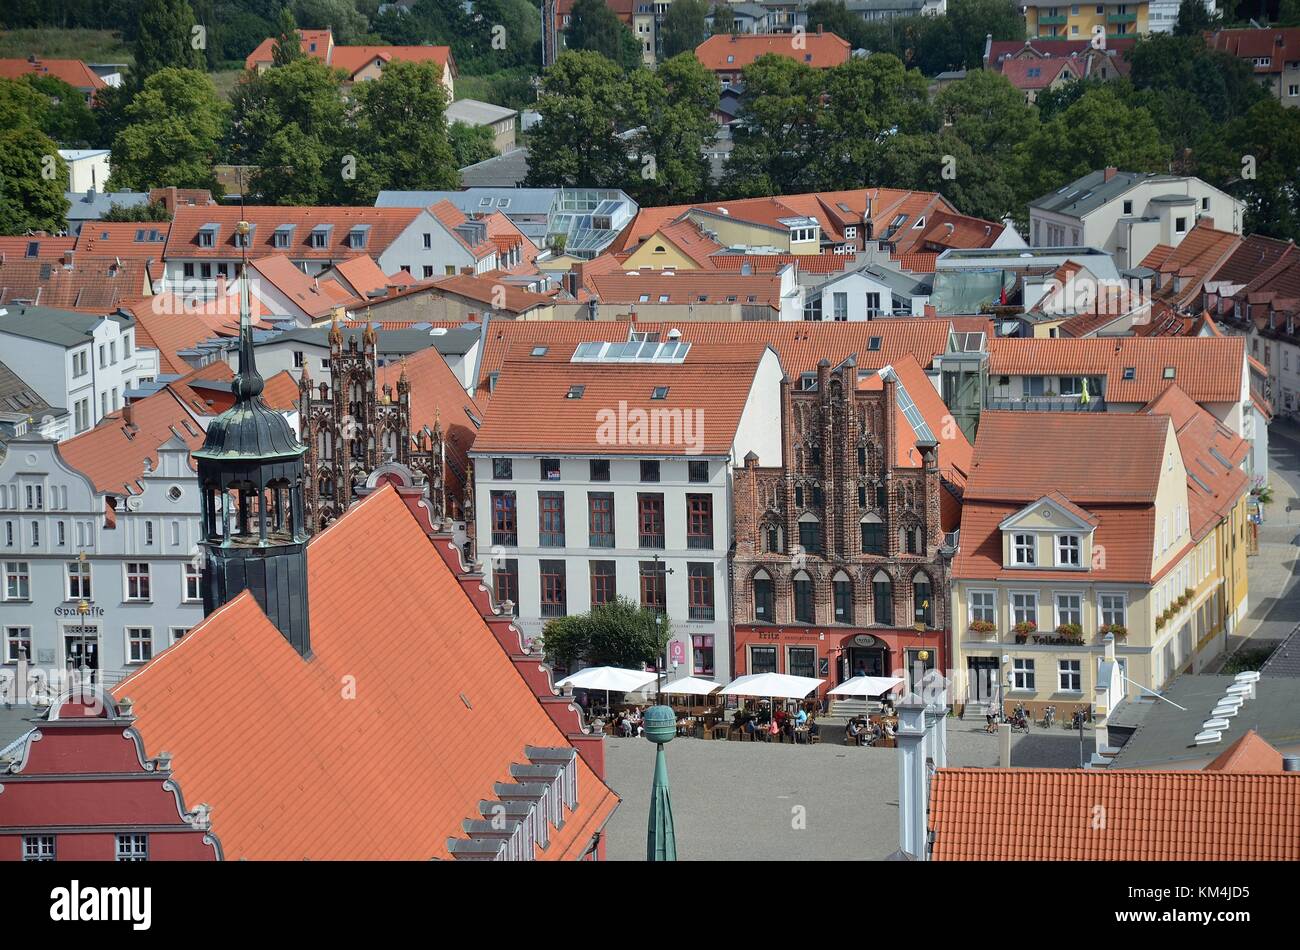 Medieval town of Greifswald (Mecklenburg-Vorpommern, Germany): A view of the Market Square Stock Photo